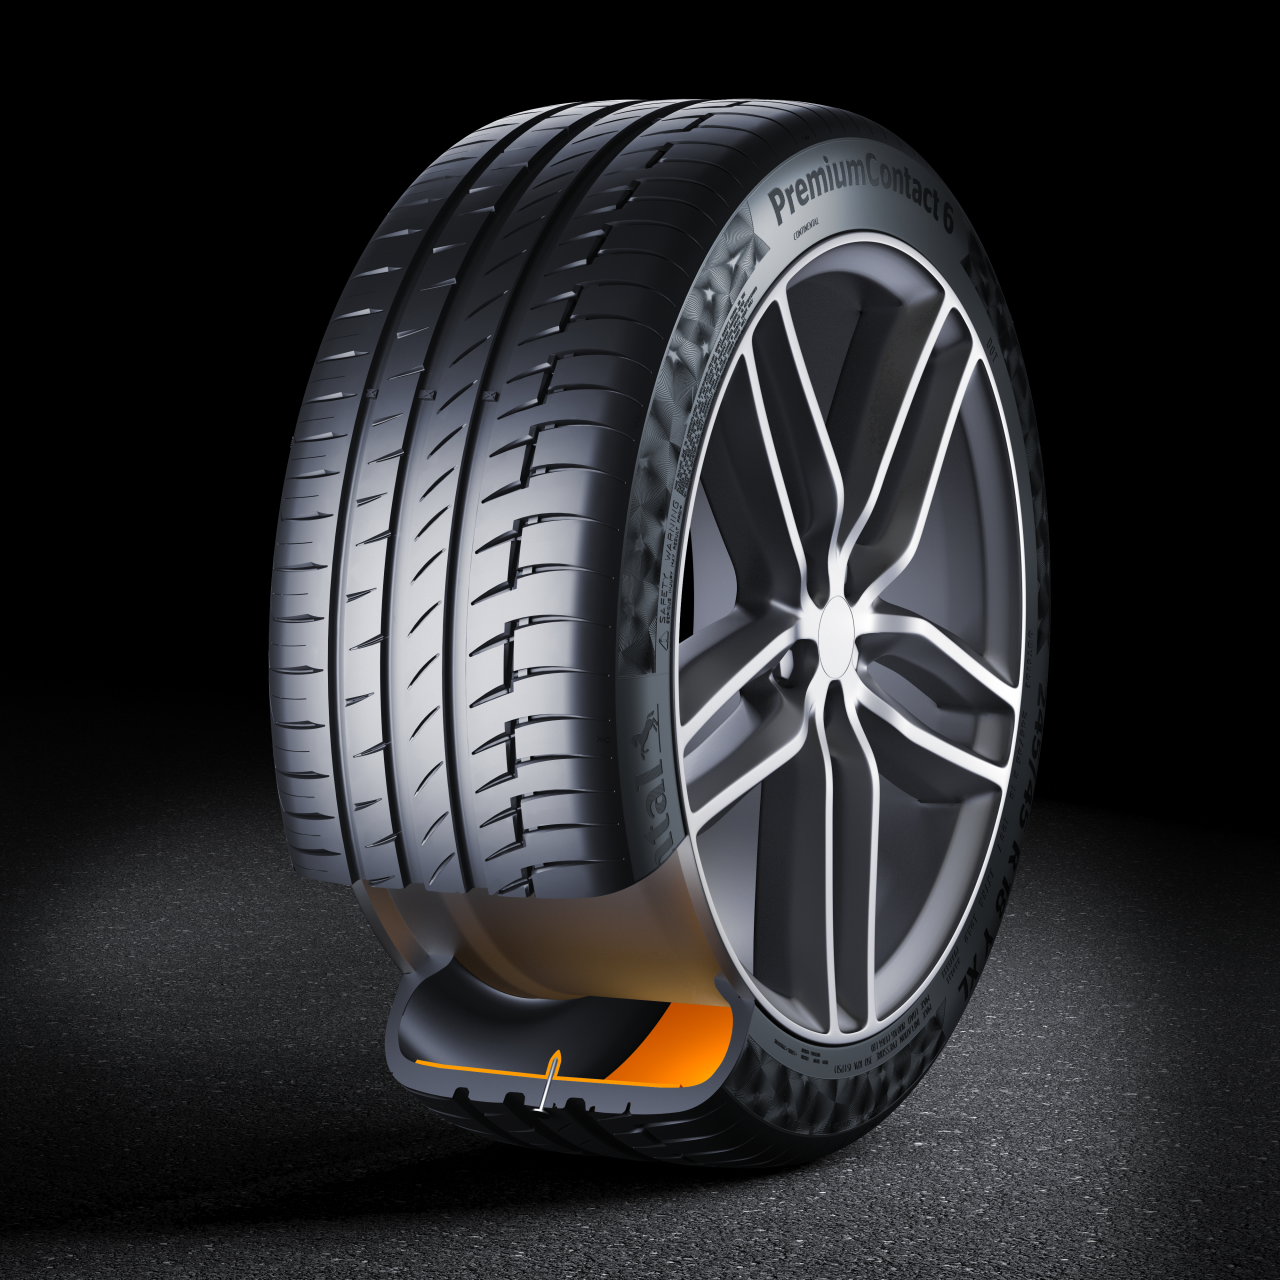 Tire with ContiSeal technology